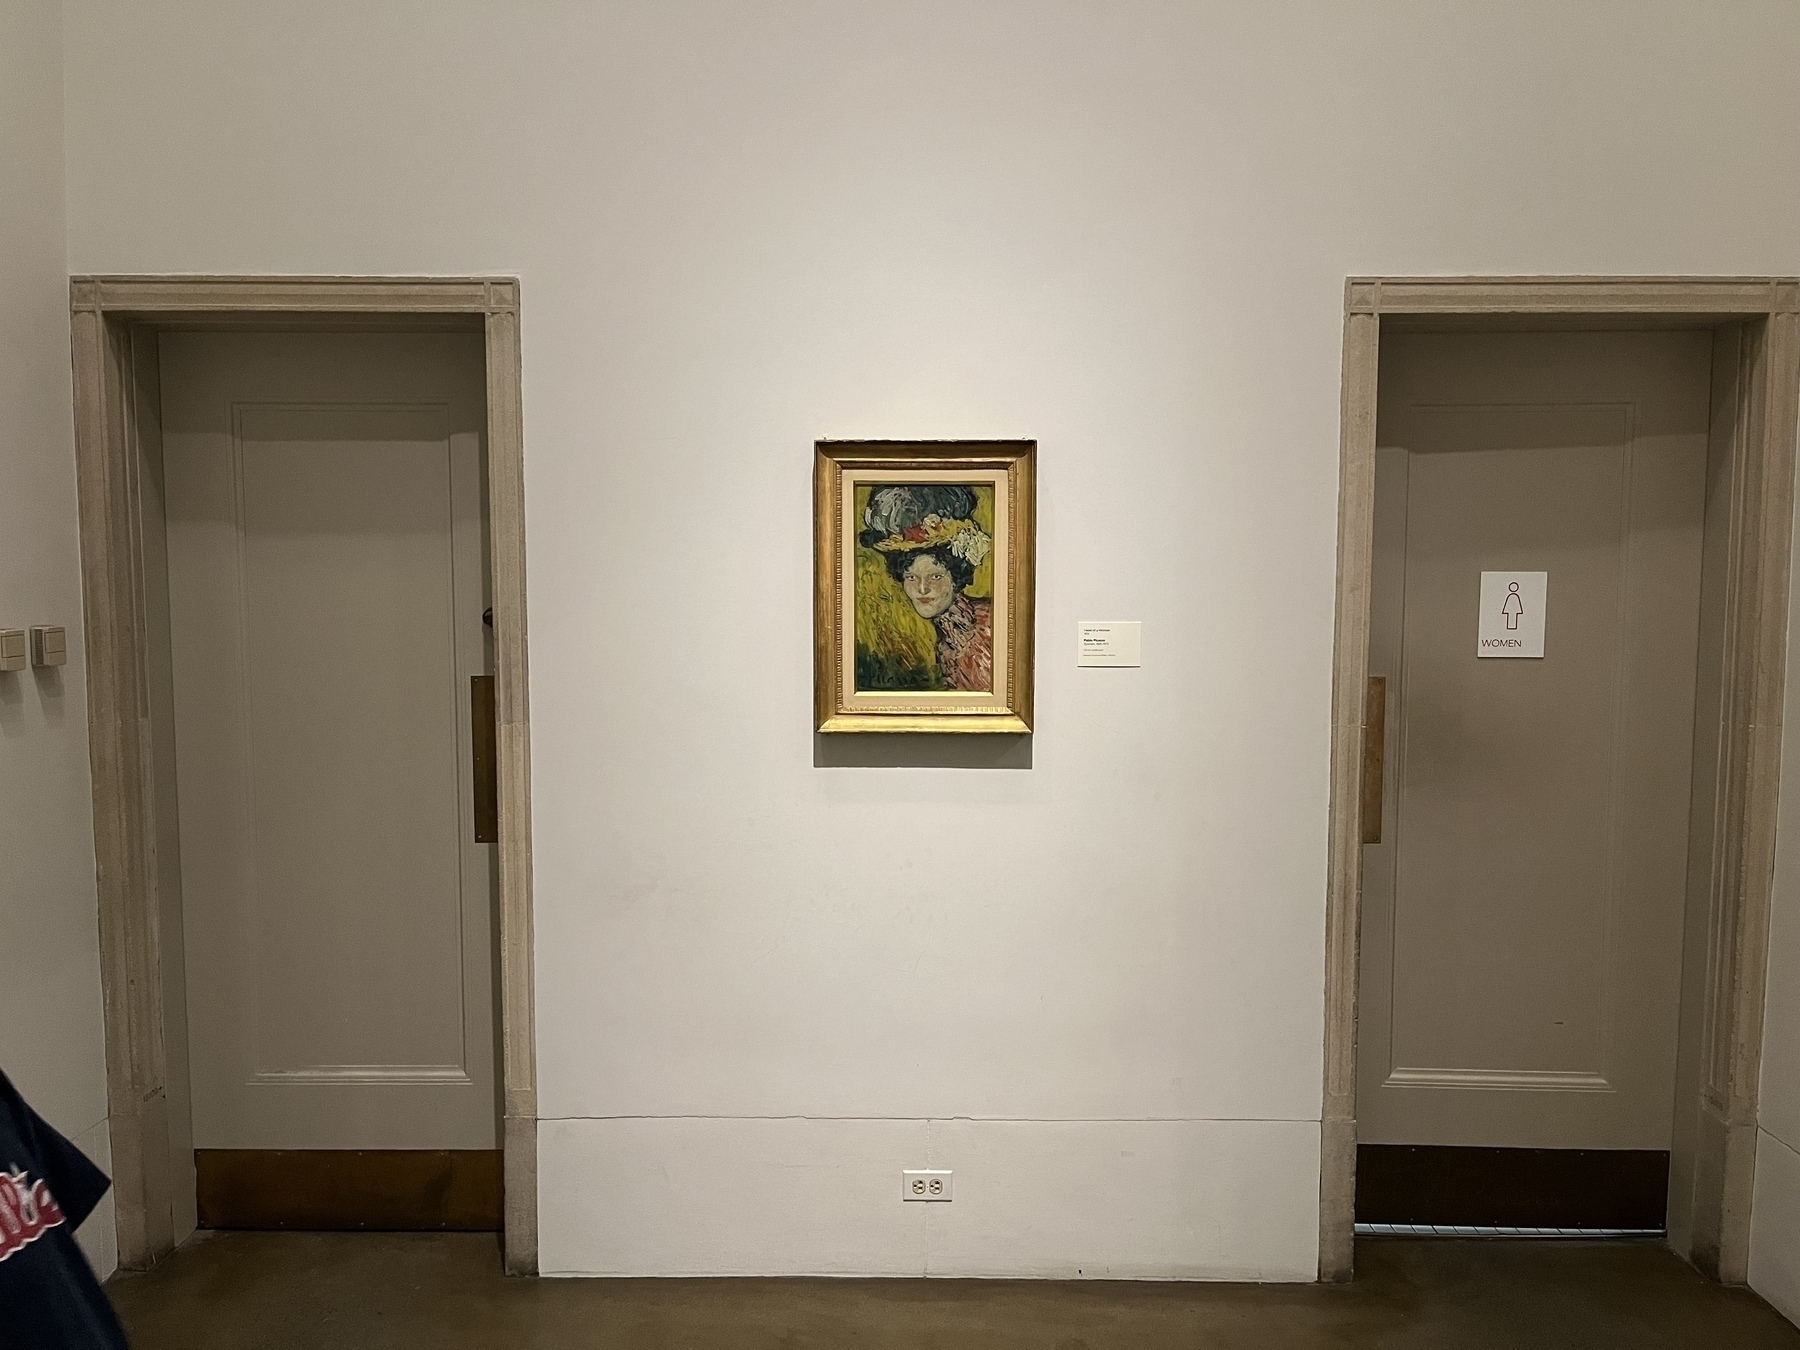 A framed painting by Picasso is displayed on a museum wall between two closed restroom doors. The door on the right is labeled "WOMEN." The painting features a person with a hat and colorful background.